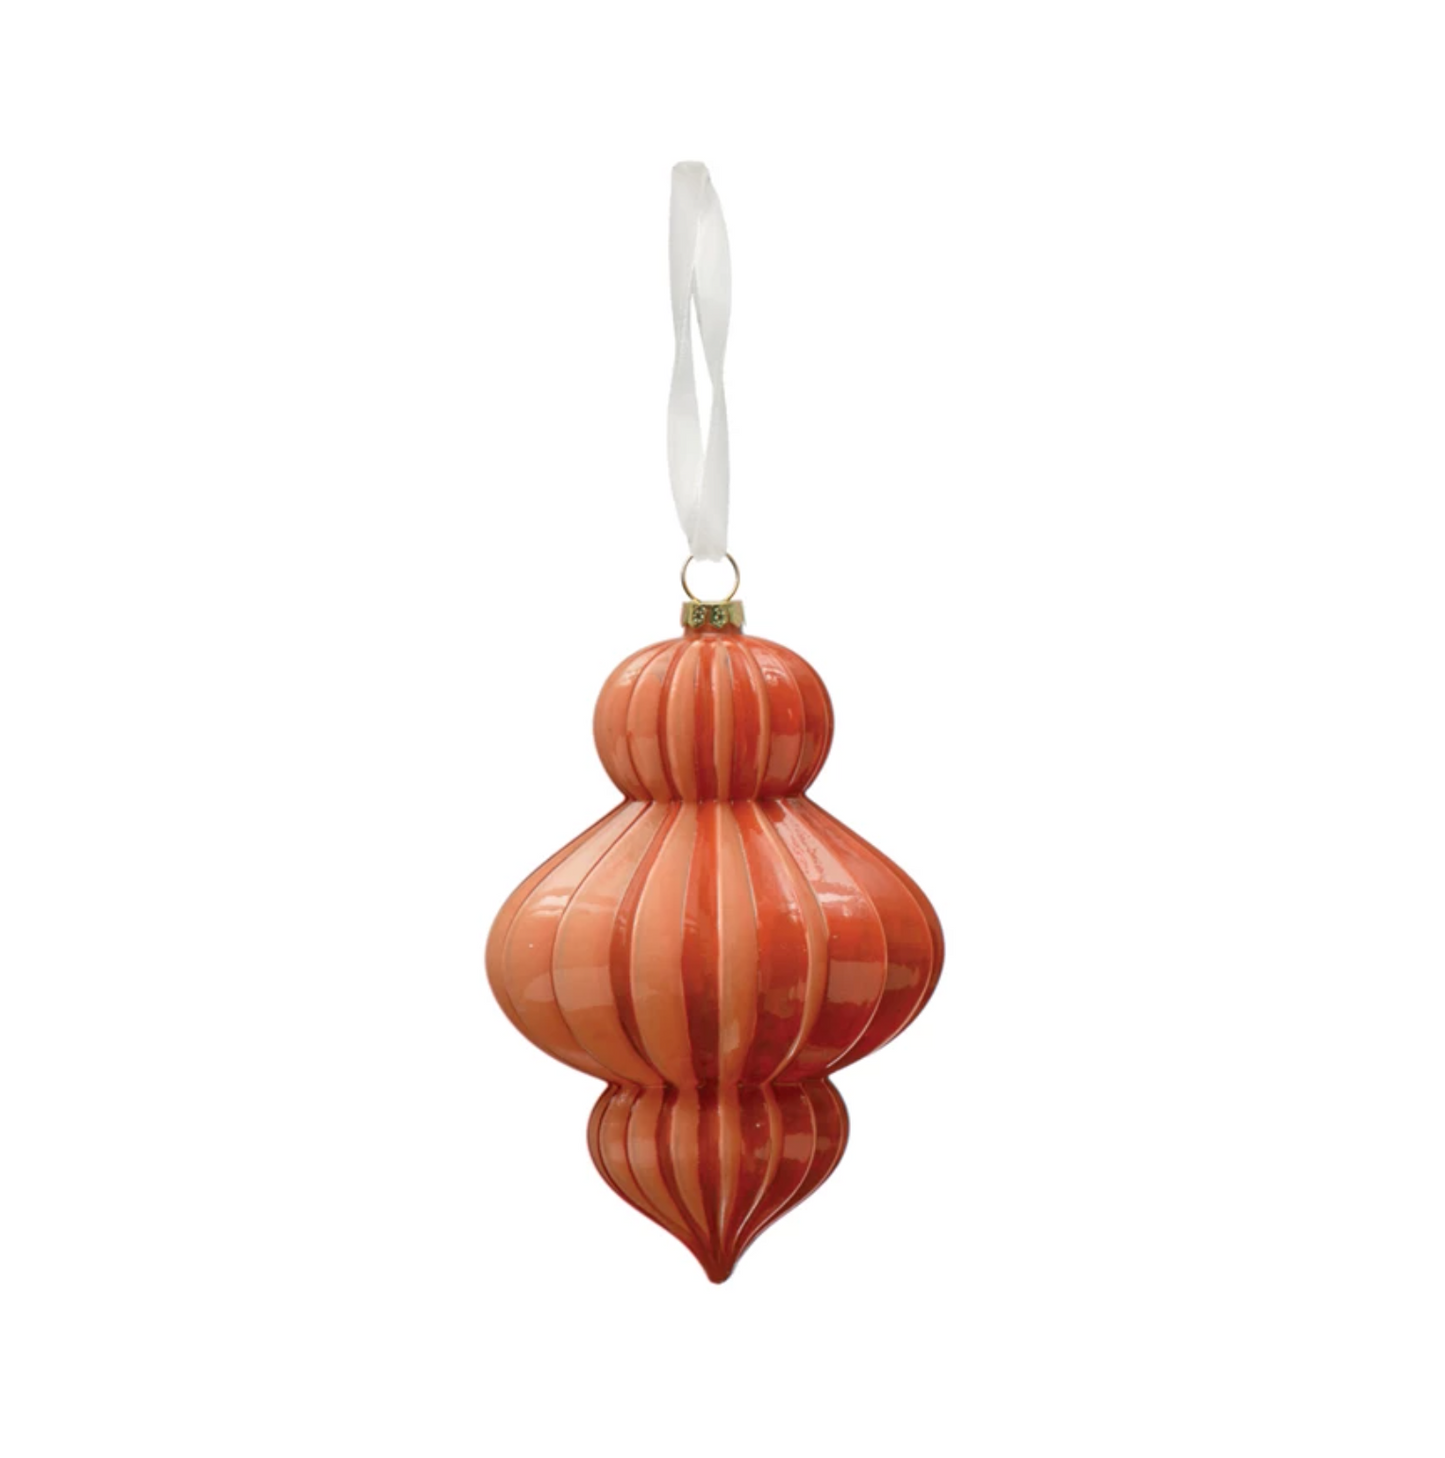 Coral Pleated Finial Ornament